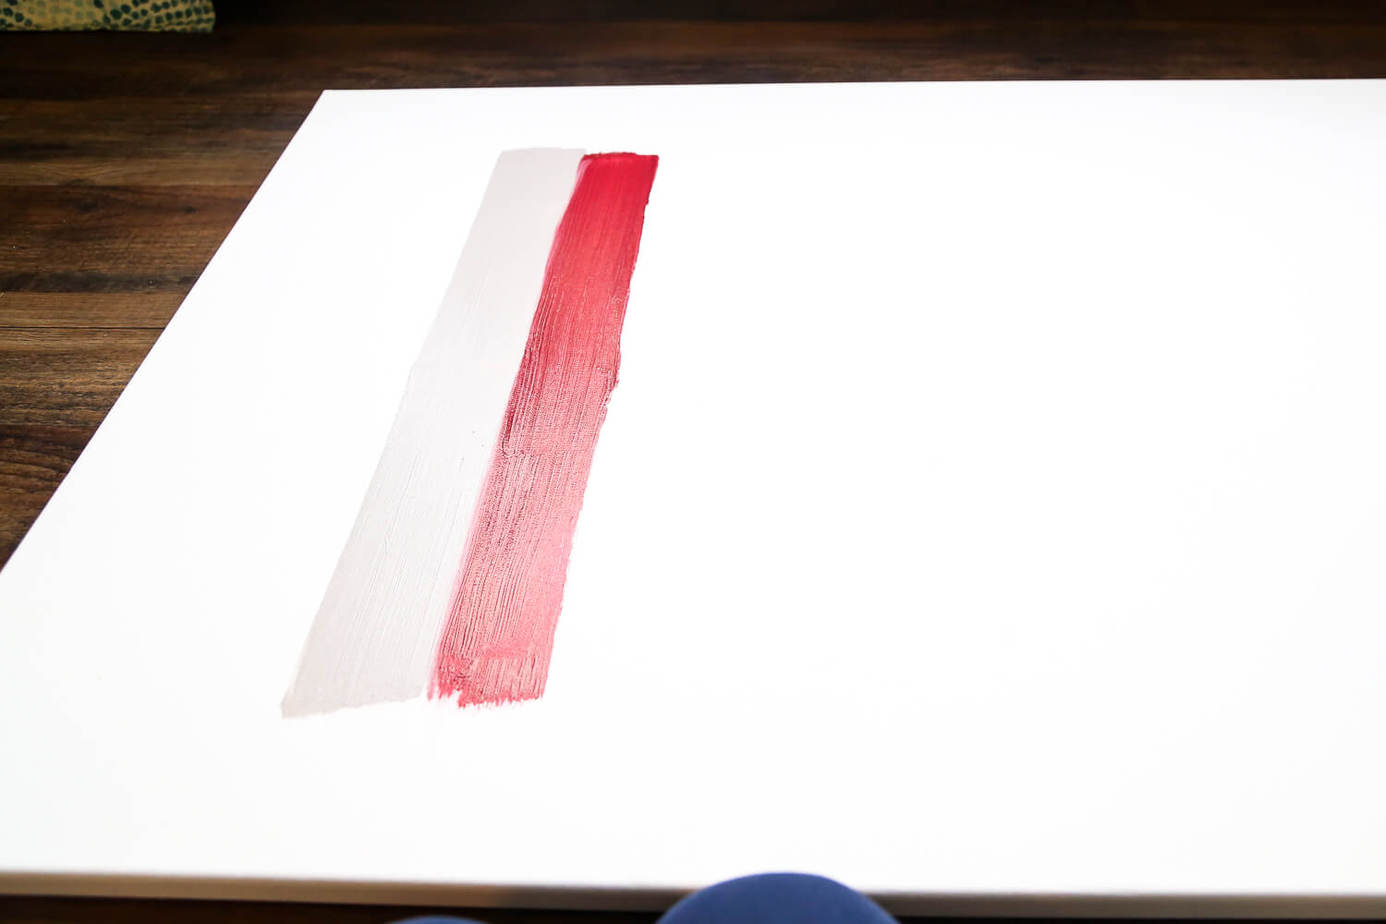 DIY brush stroke art - this is SO easy and you can do it even if you aren't creative at all.